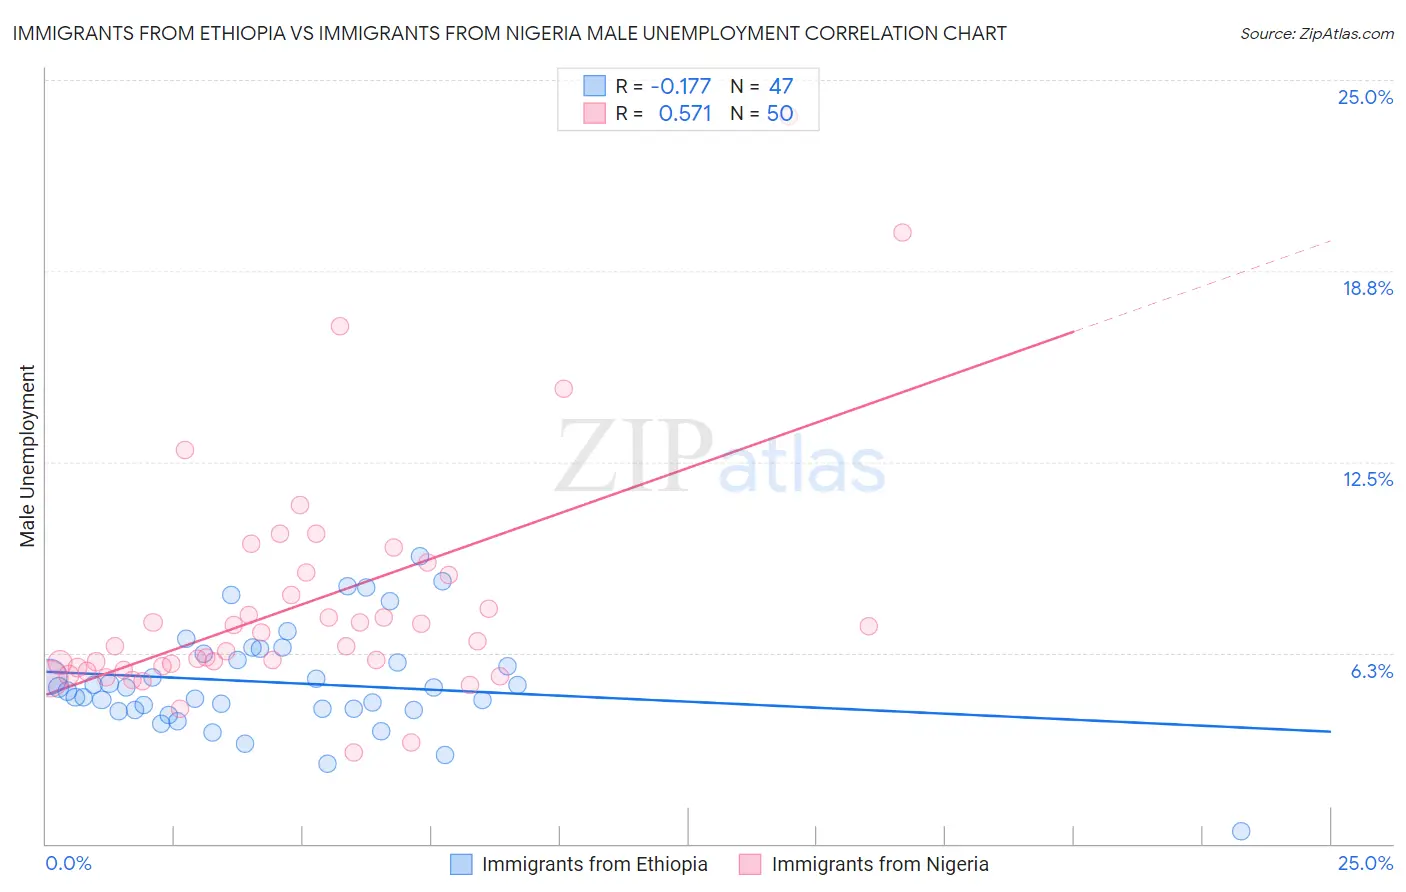 Immigrants from Ethiopia vs Immigrants from Nigeria Male Unemployment